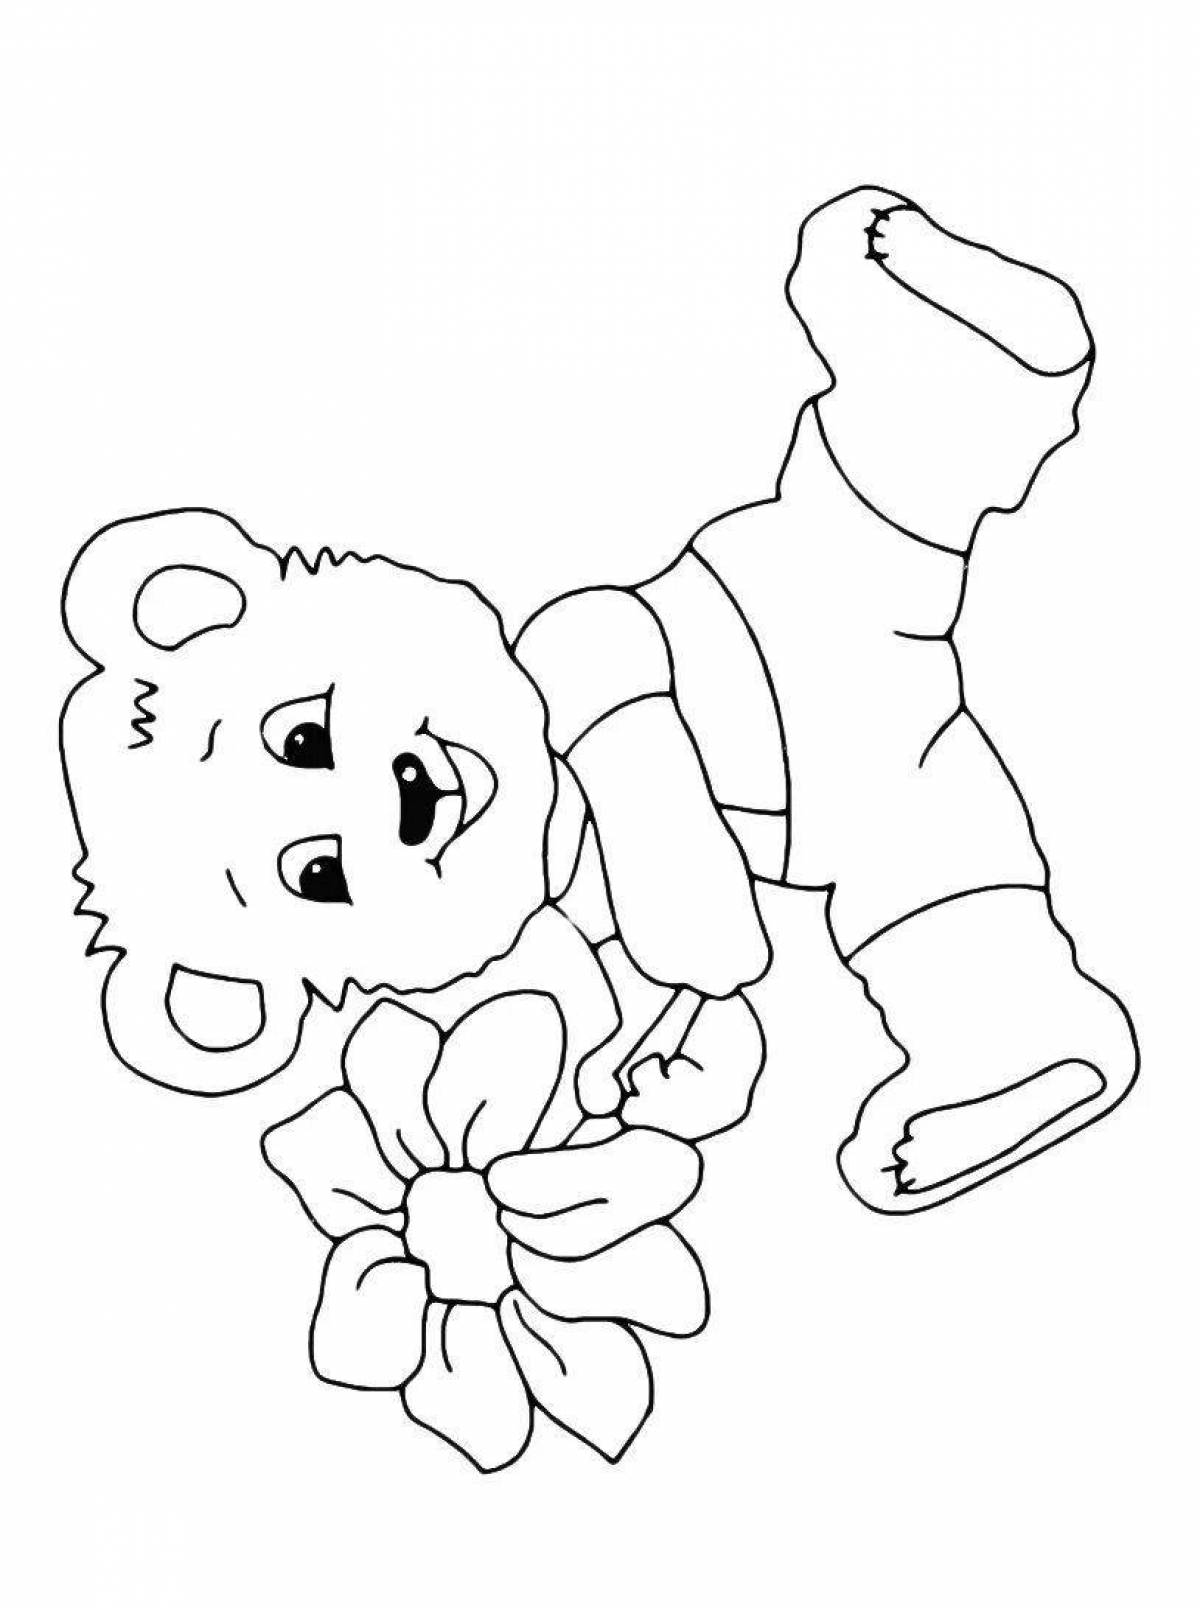 Colorful teddy bear in children's pants coloring book